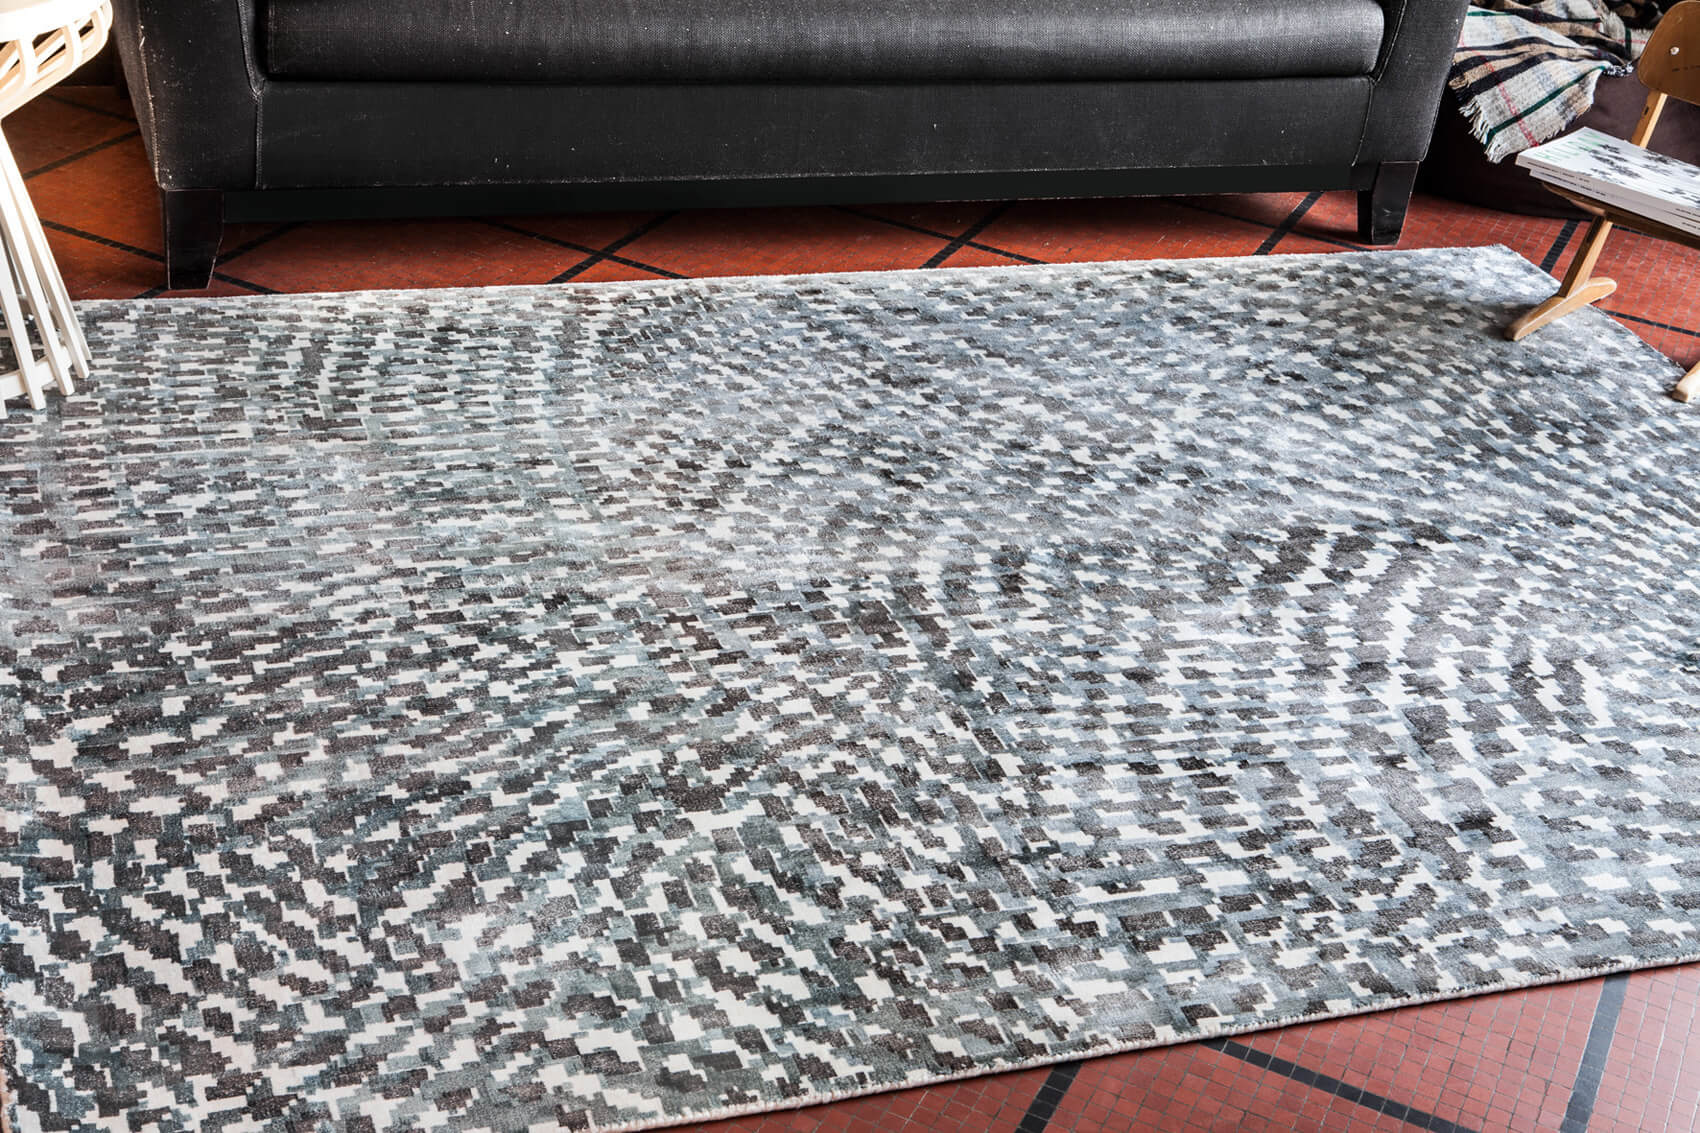 Out of Focus Rug by Serge Lesage ☞ Size: 200 x 300 cm